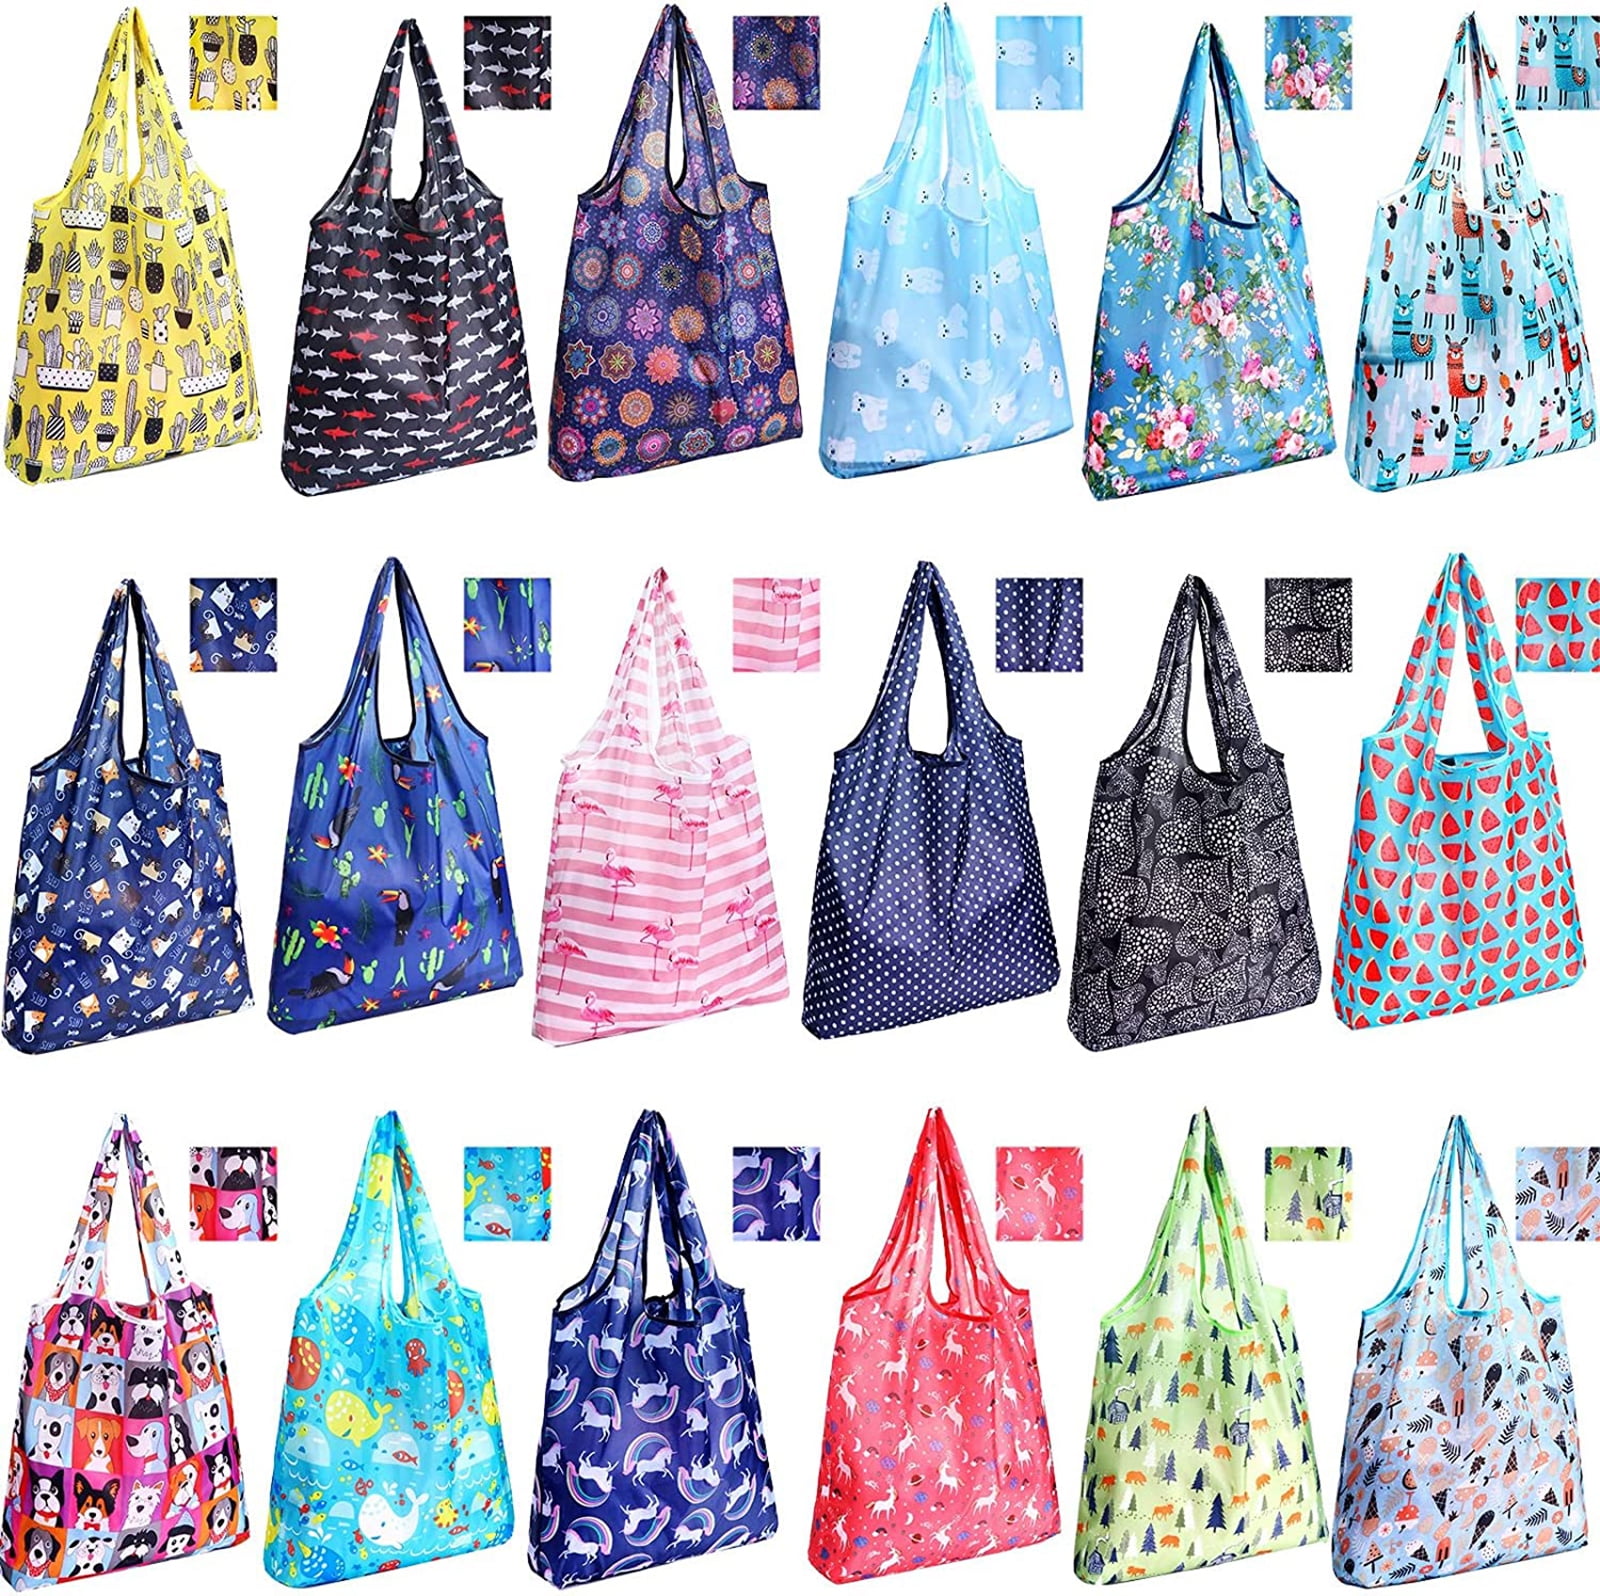 18 Pack Reusable Grocery Shopping Bags, Eco-friendly Nylon Hanging Tote ...